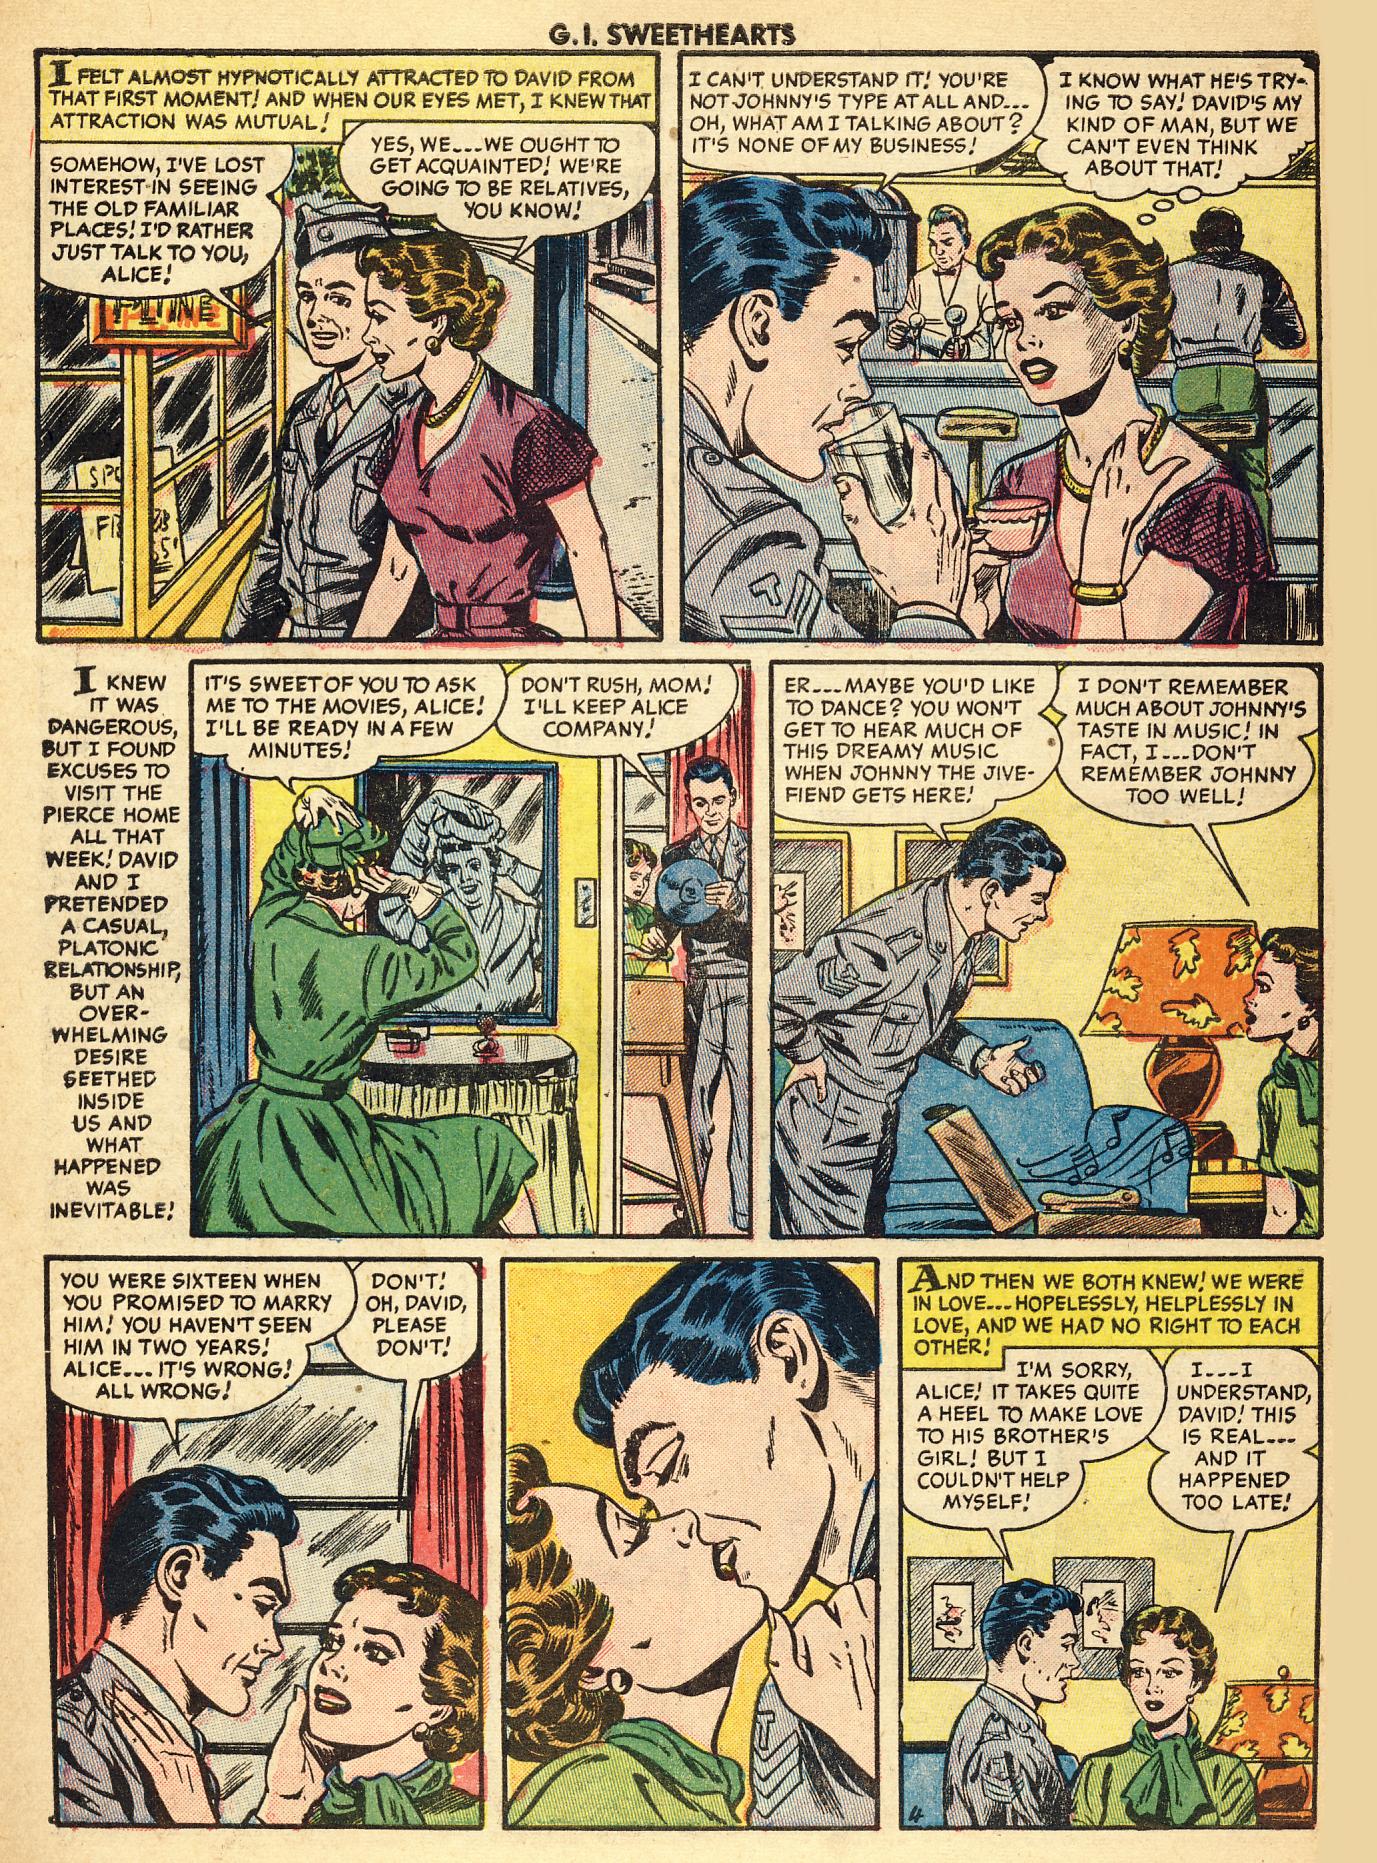 Read online G.I. Sweethearts comic -  Issue #41 - 6